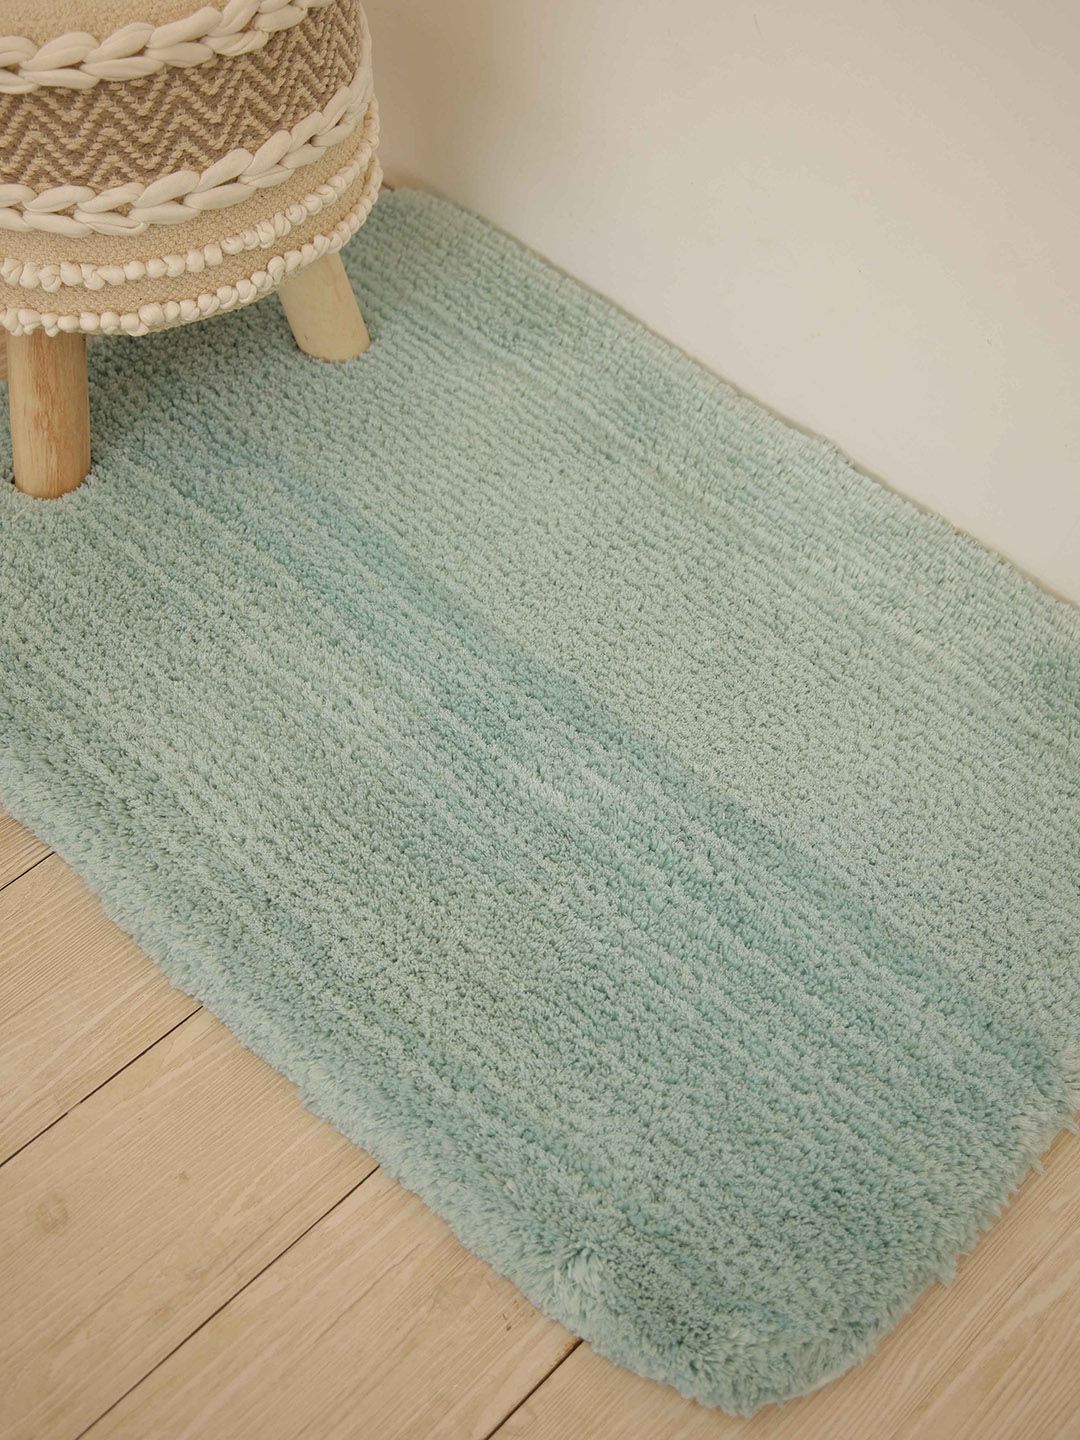 Ariana Green 300 GSM Textured Supersoft Bath Rug Price in India